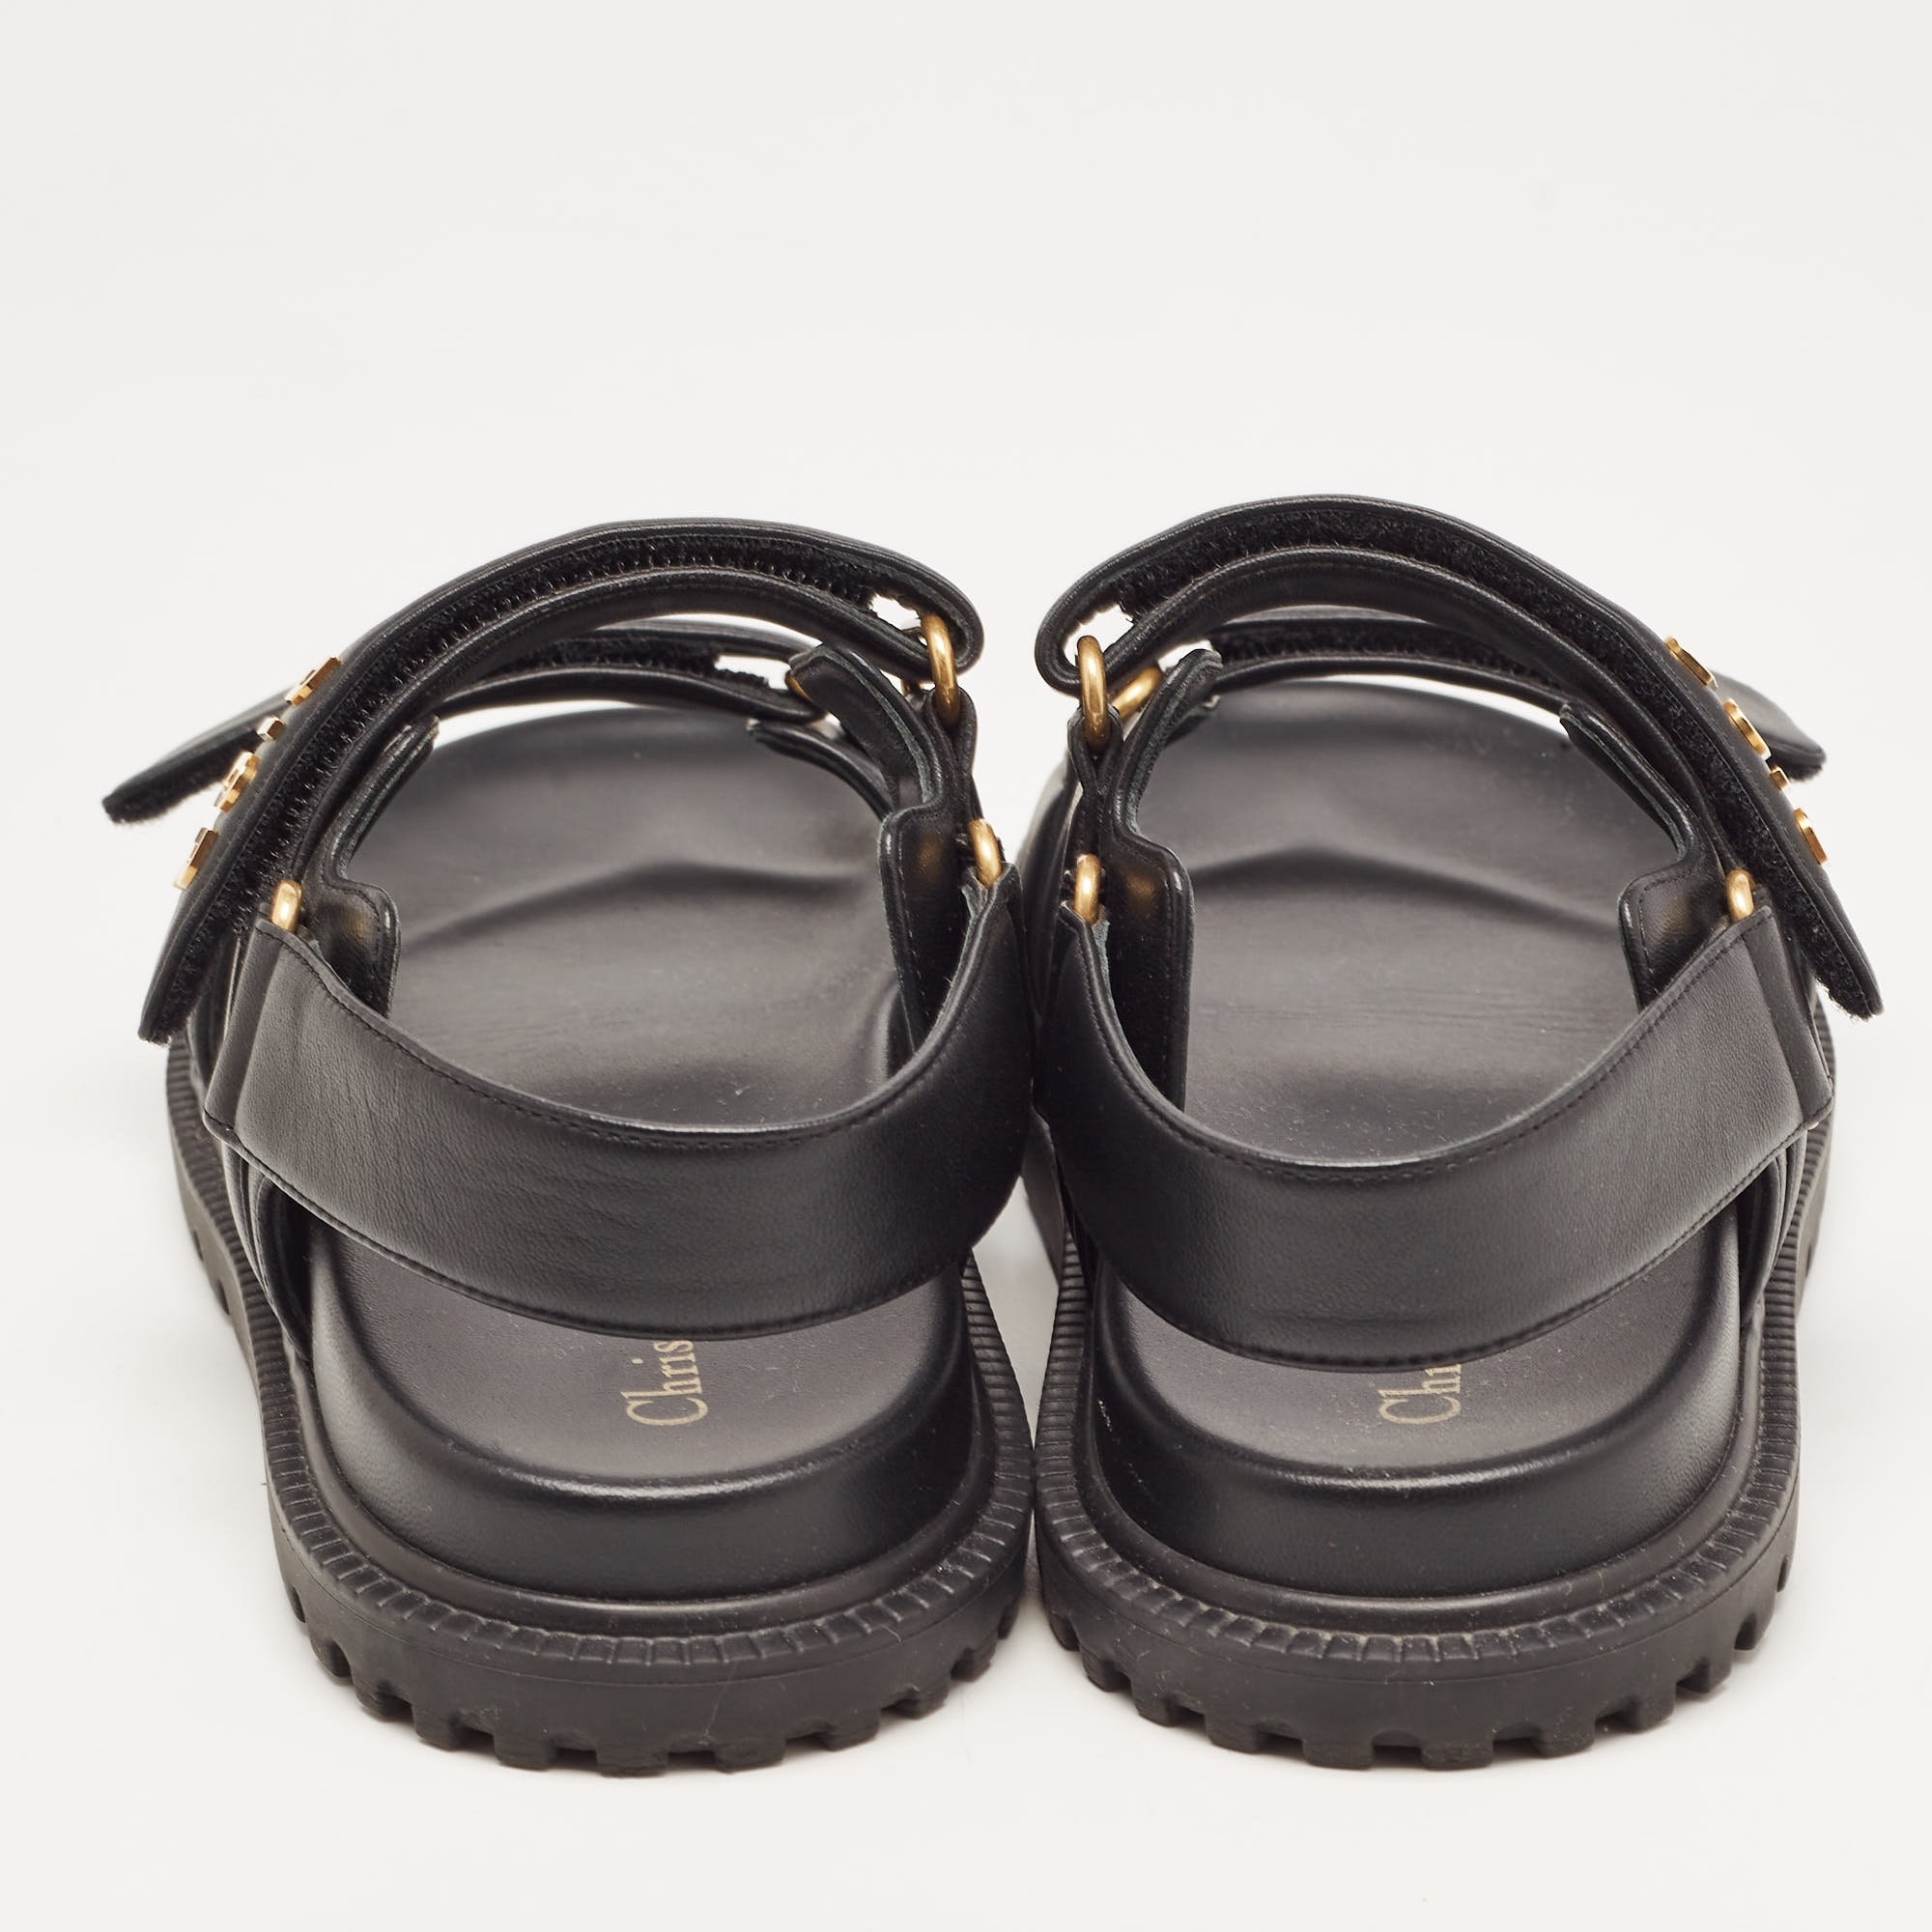 Dior Black Leather DiorAct Slingback Sandals Size 39.5